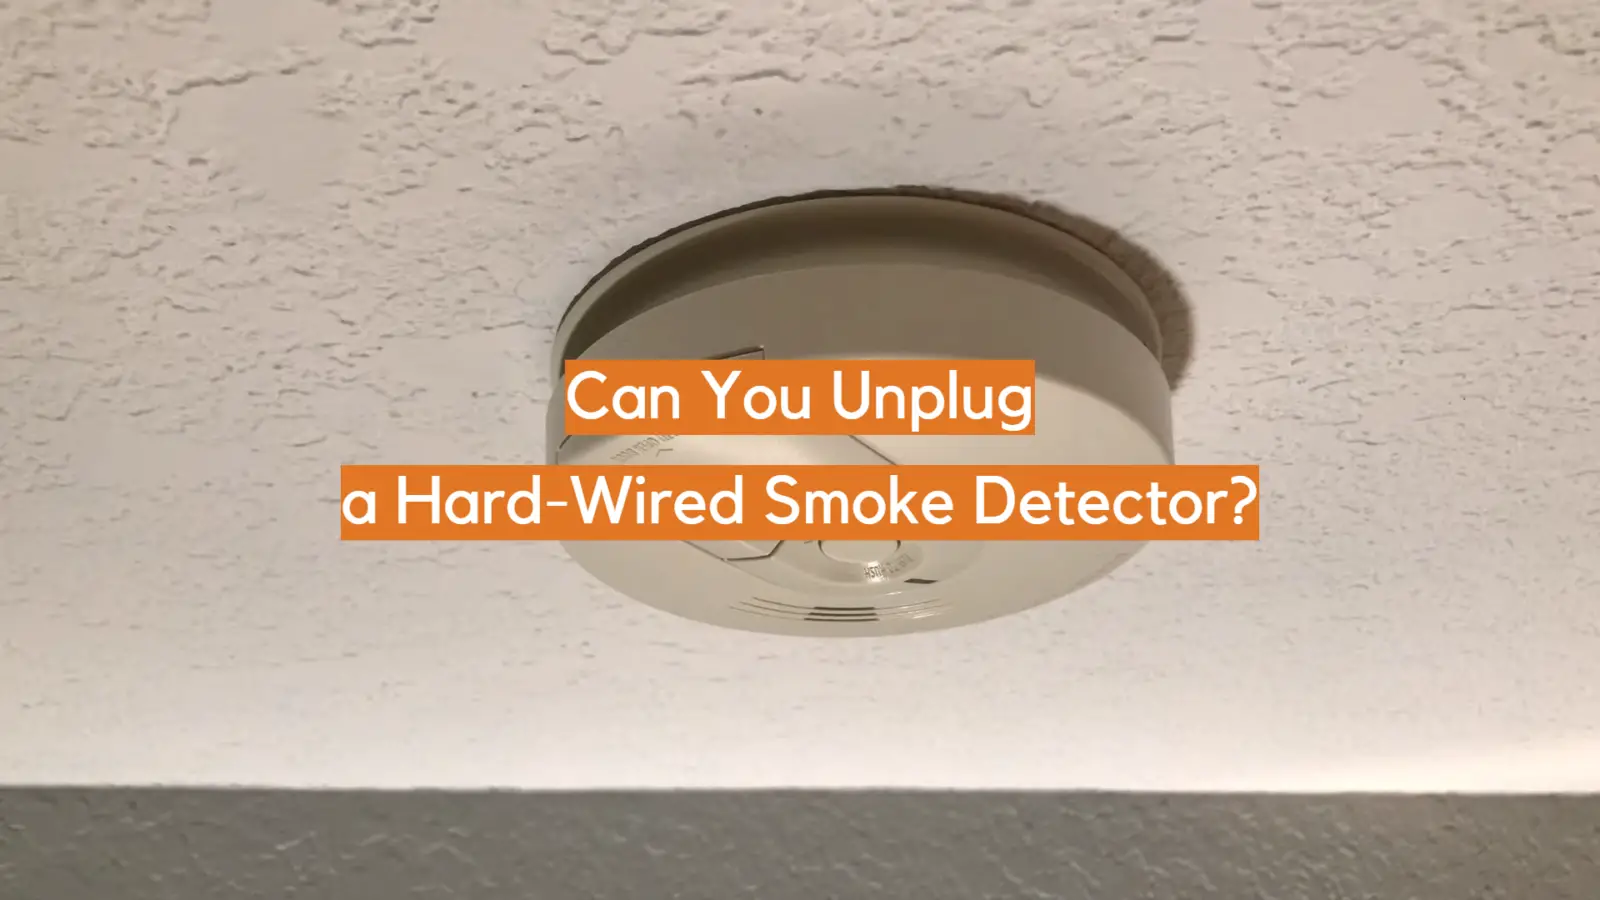 Can You Unplug a Hard-Wired Smoke Detector?